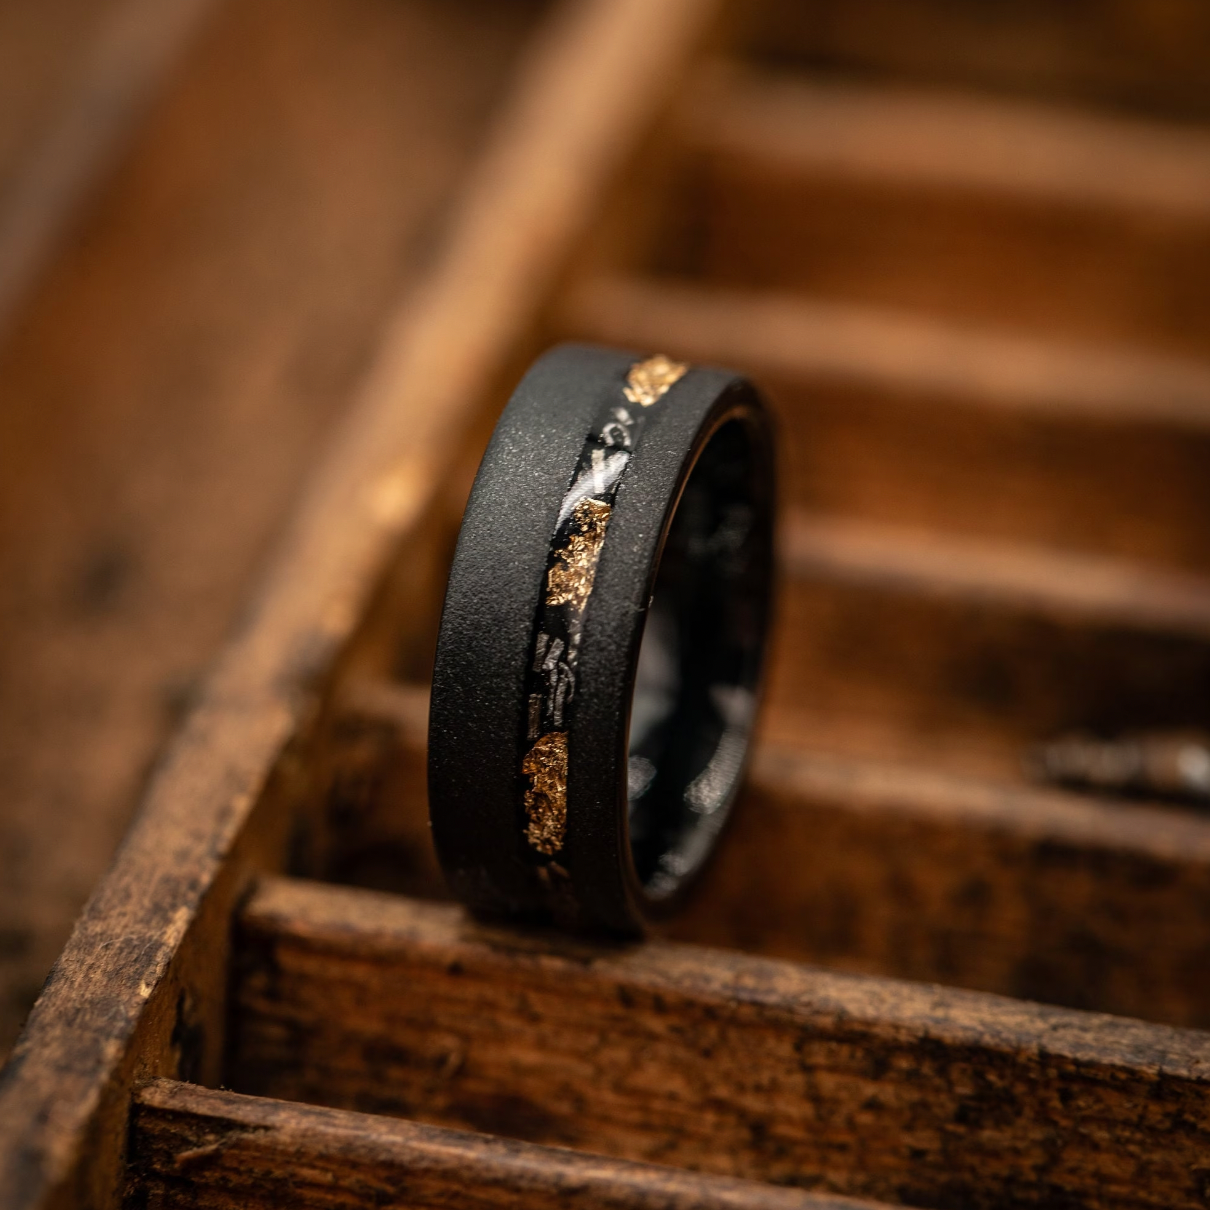 Striking black and gold meteorite ring with sandblasted finish, ideal for weddings or engagements.